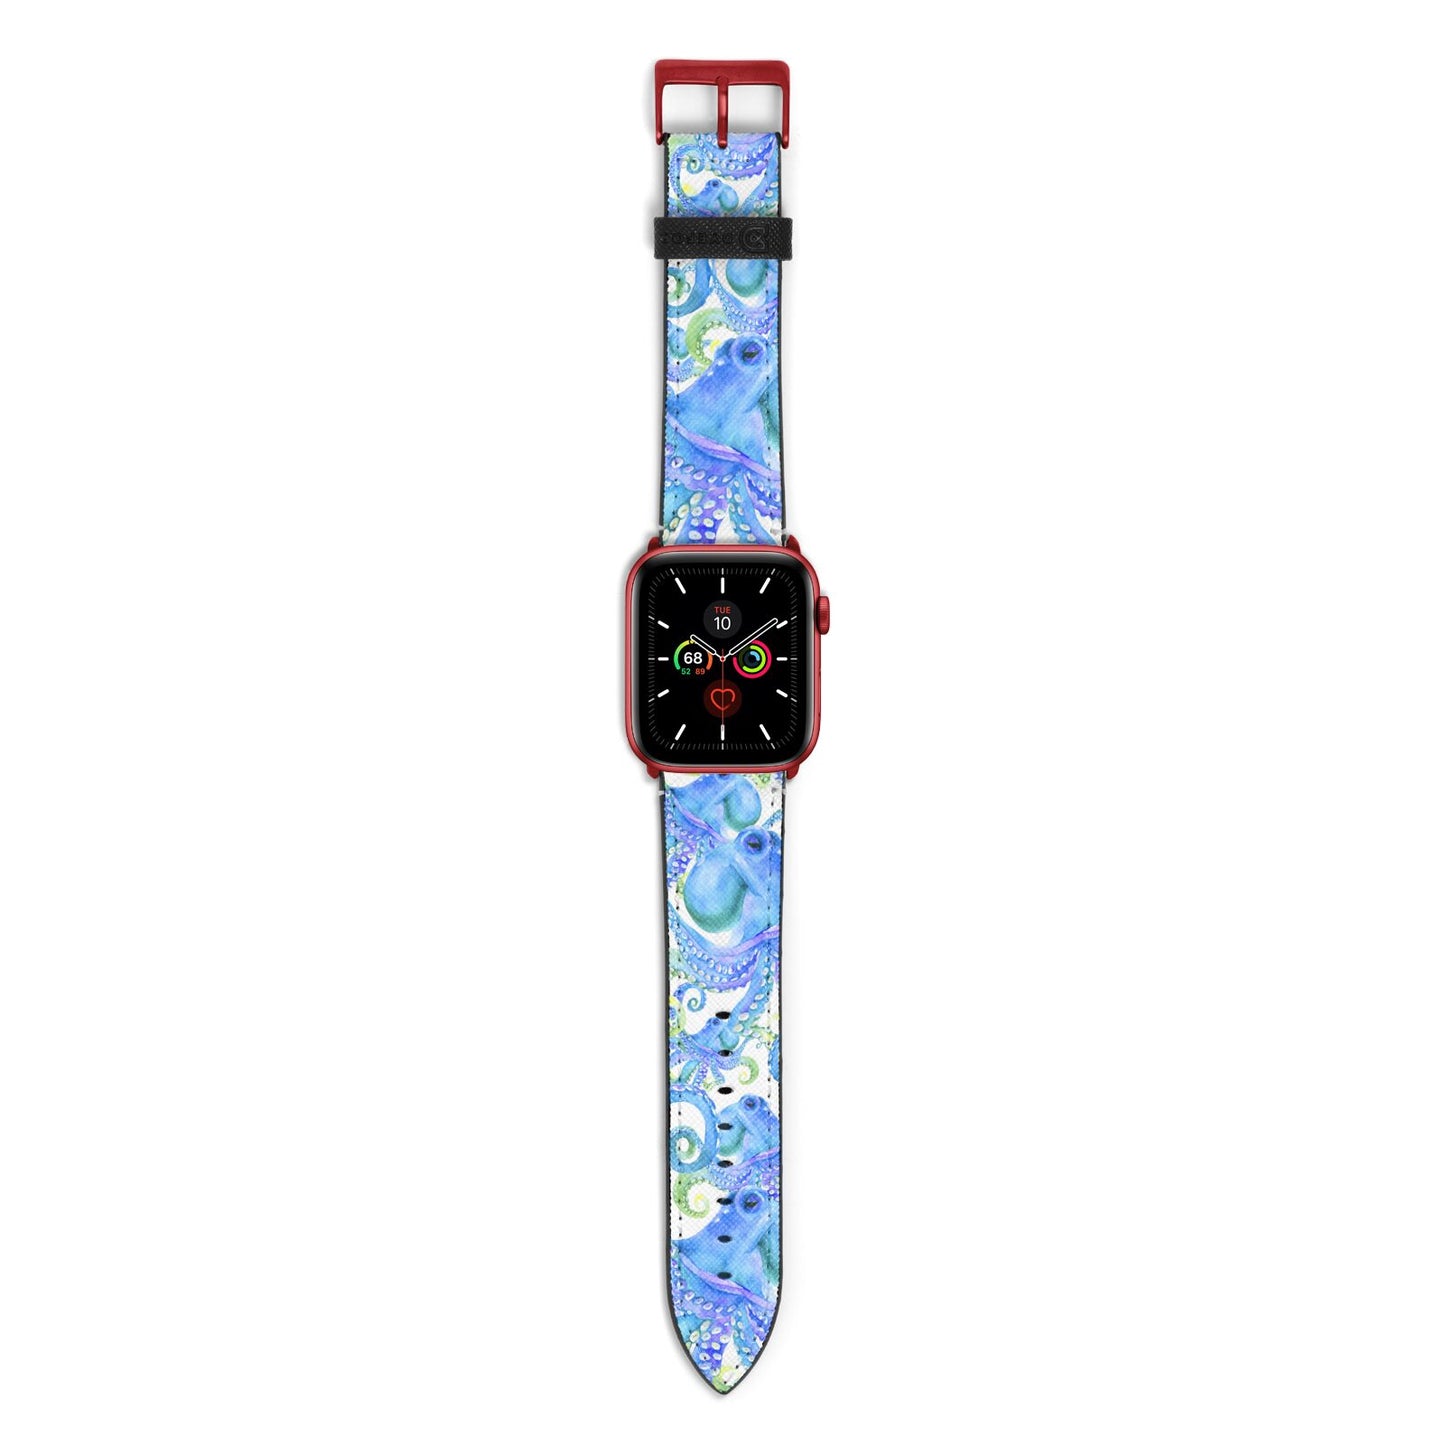 Octopus Apple Watch Strap with Red Hardware